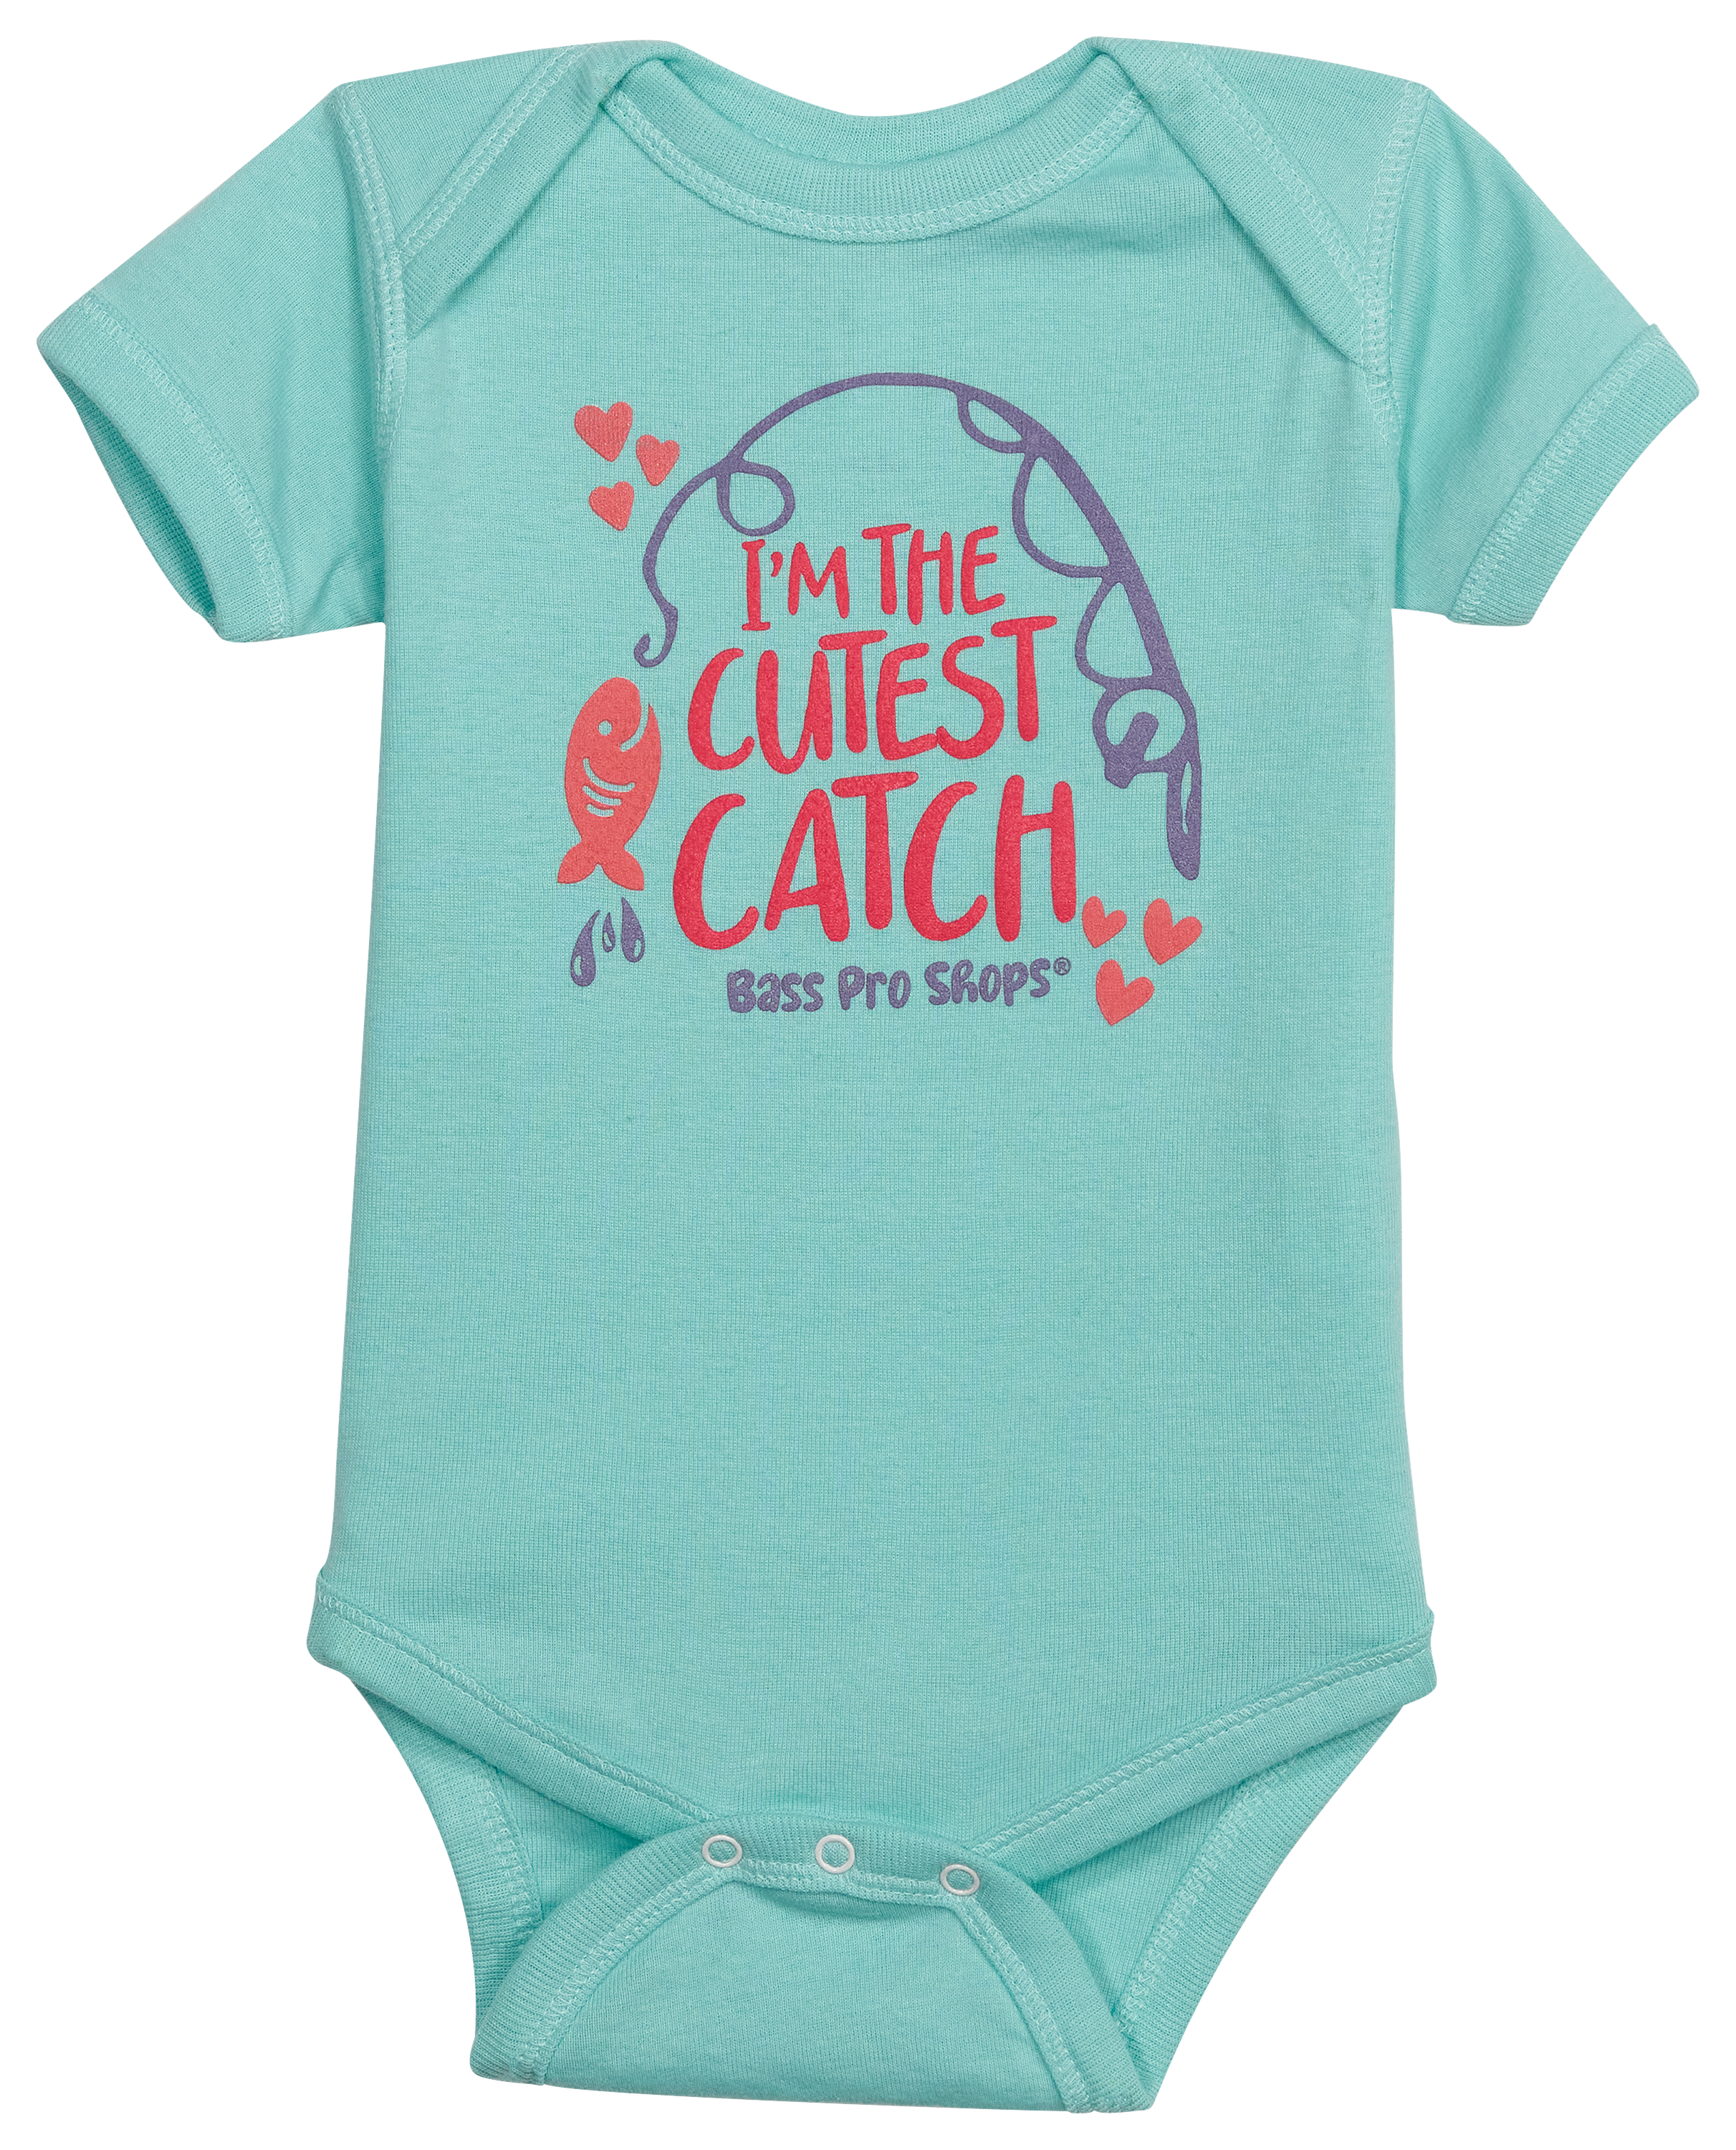 Bass Pro Shops I'm The Cutest Catch Bodysuit for Babies - Chill - 18 Months